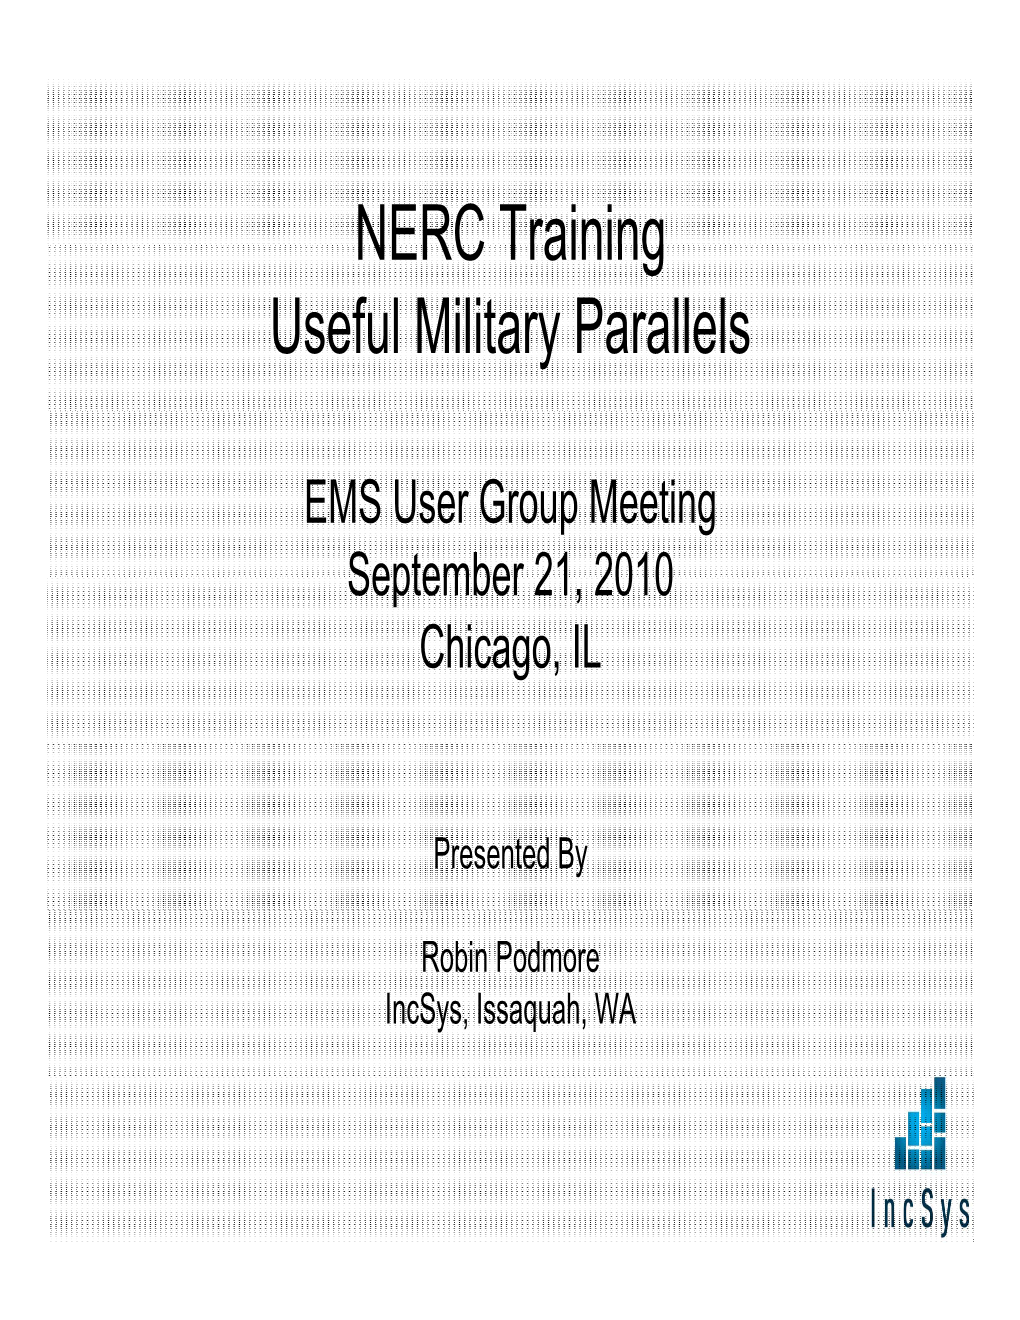 NERC Training Useful Military Parallels